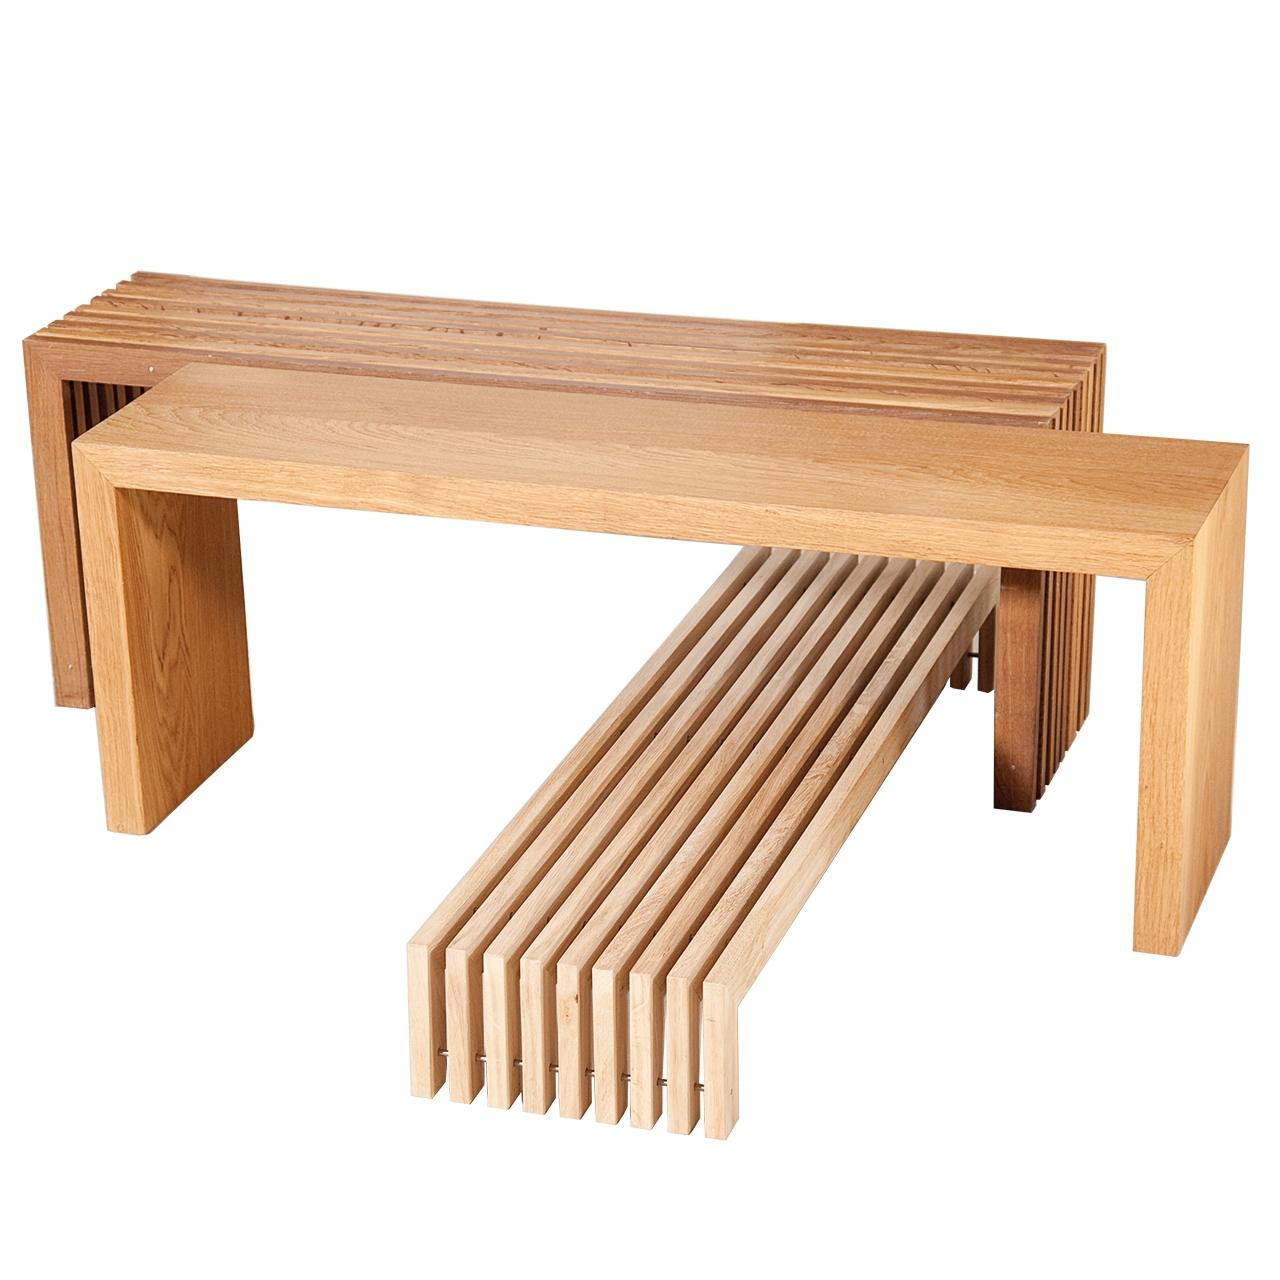 Bench made of solid oak